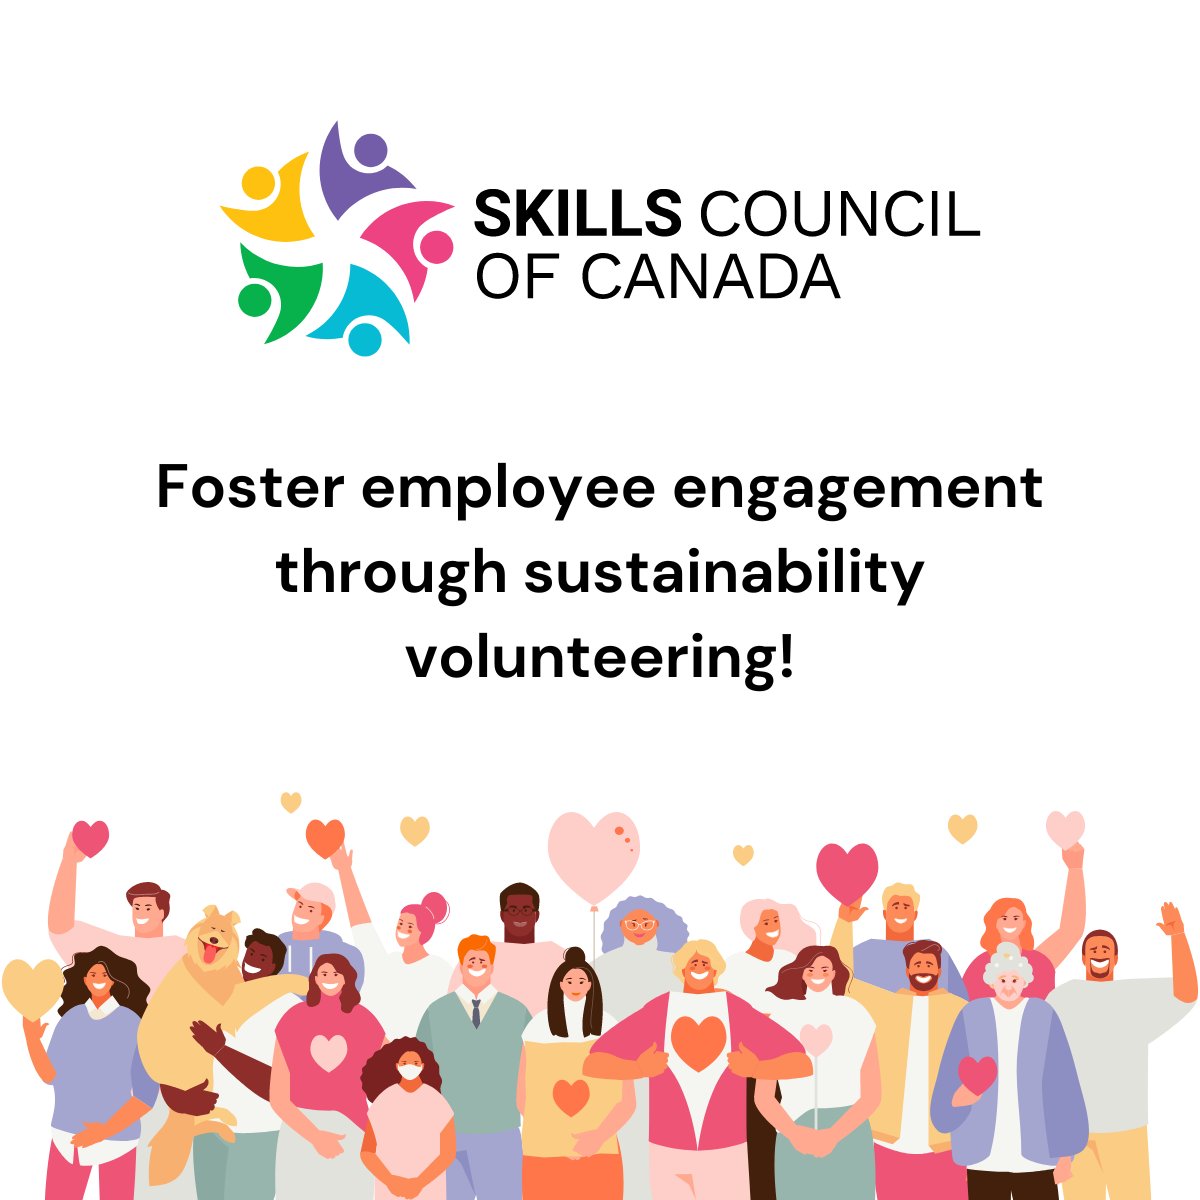 💡 Organize activities that support the SDGs in your organization. Environmental cleanup initiatives, supporting local community projects, or promoting sustainability can foster team spirit and create a positive workplace culture. #EmployeeVolunteering #TeamBuilding #SocialImpact